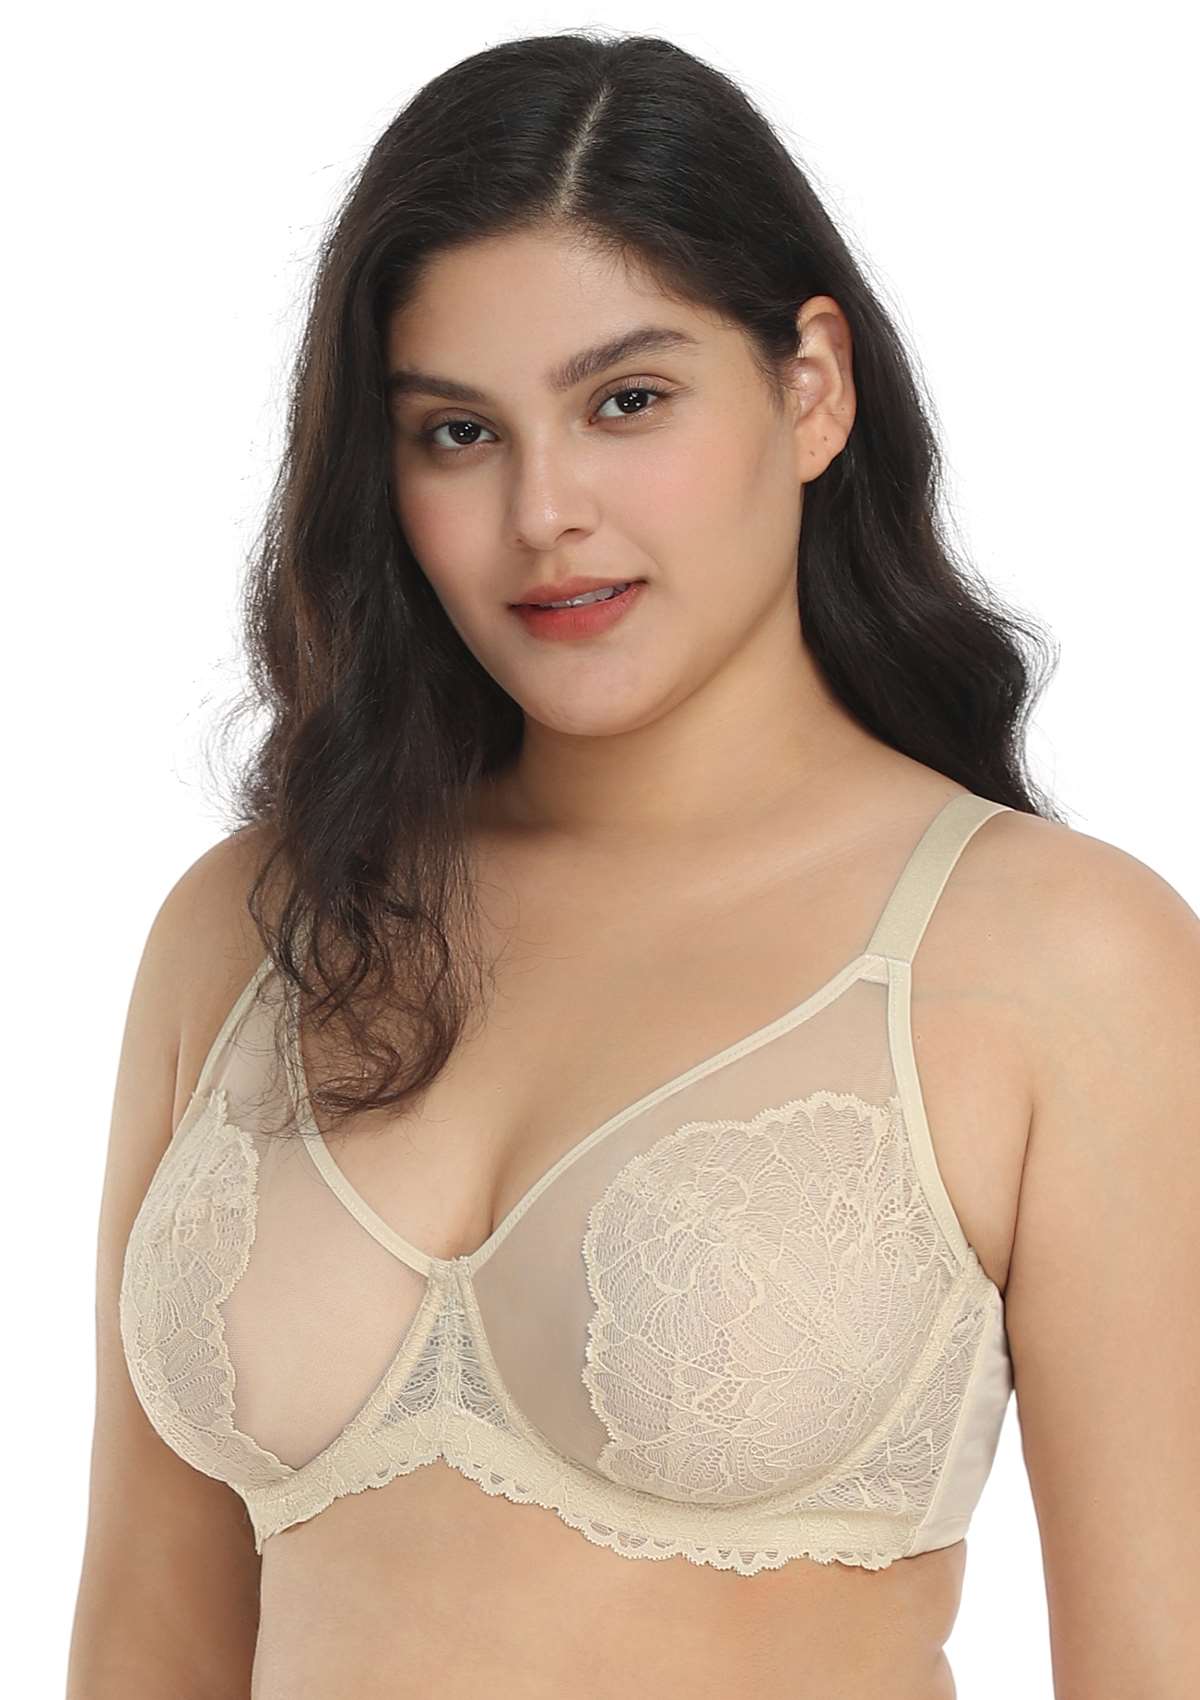 HSIA Blossom Full Coverage Side Support Bra: Designed For Heavy Busts - Beige / 34 / D